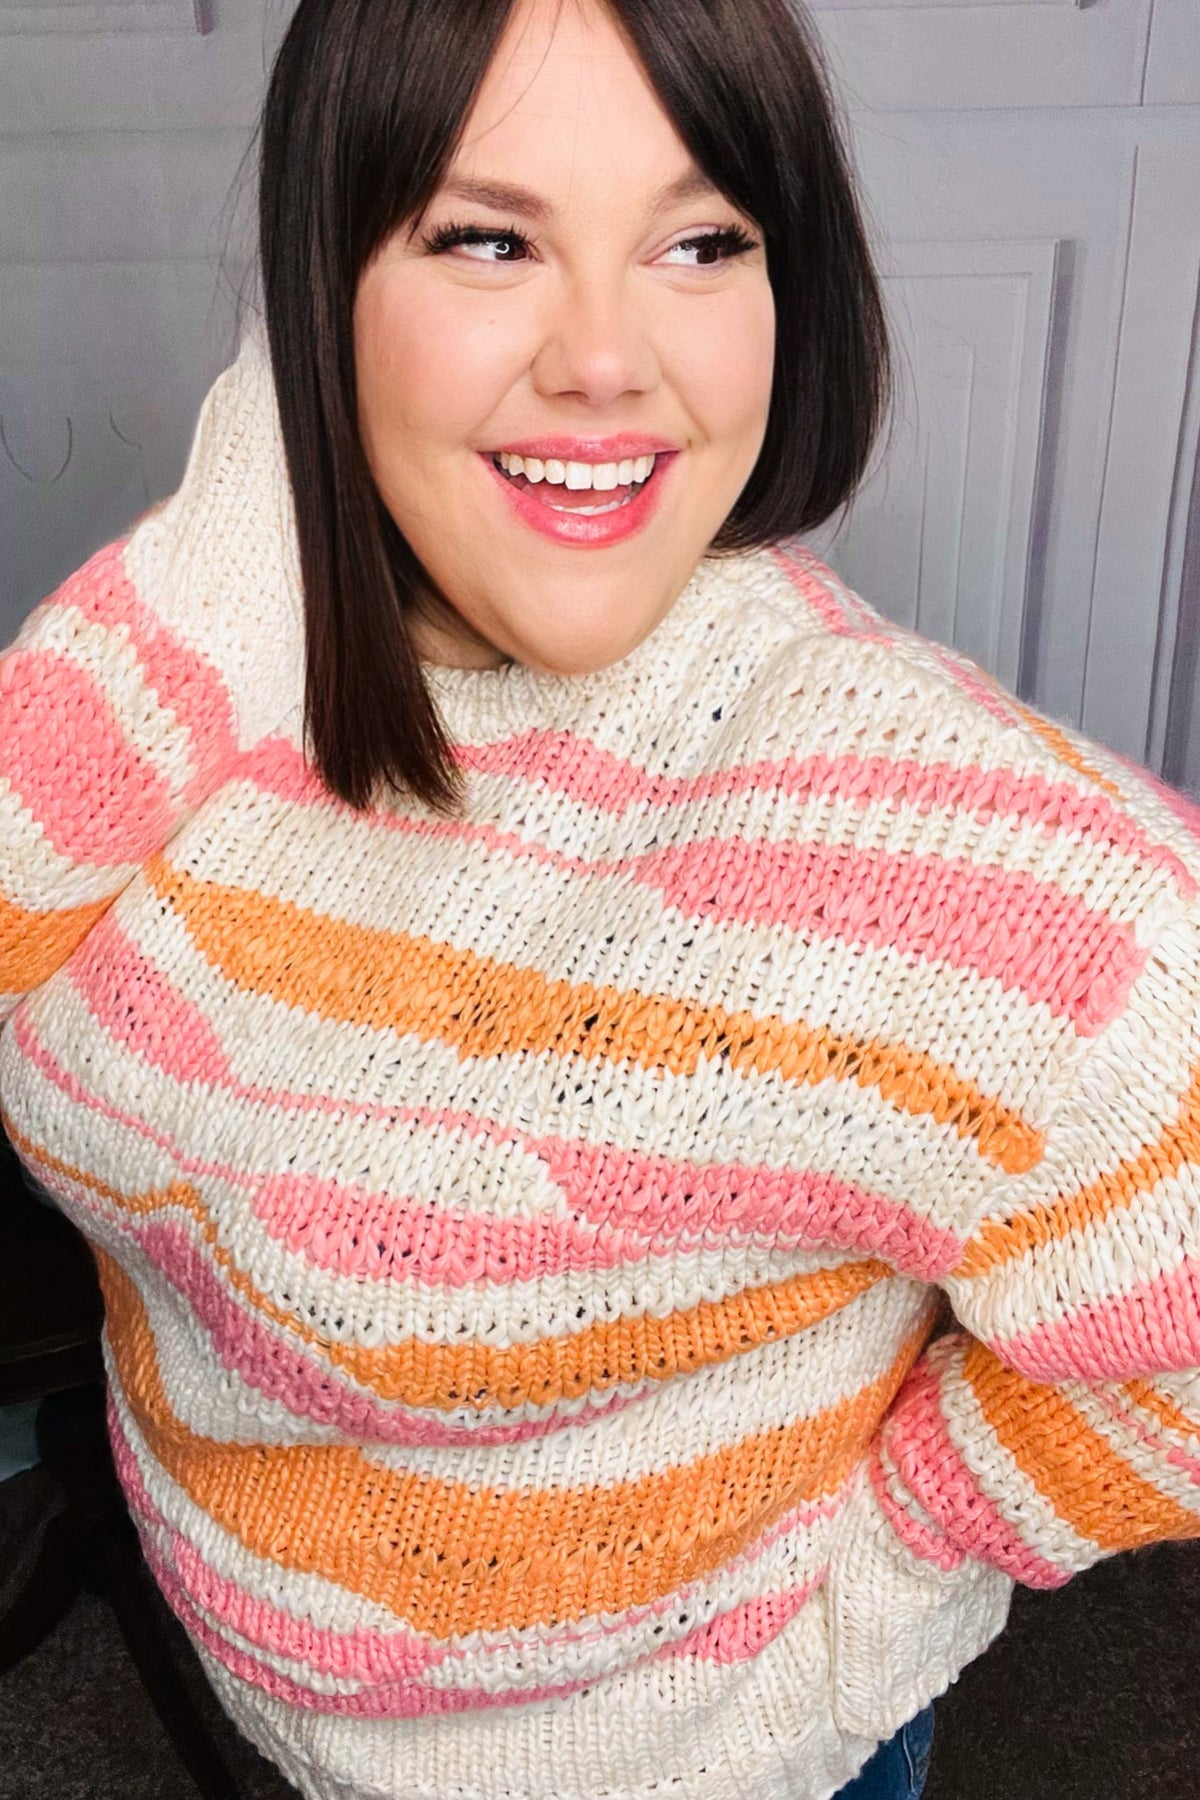 Perfectly You Mango Multicolor Stripe Chunky Knit Sweater